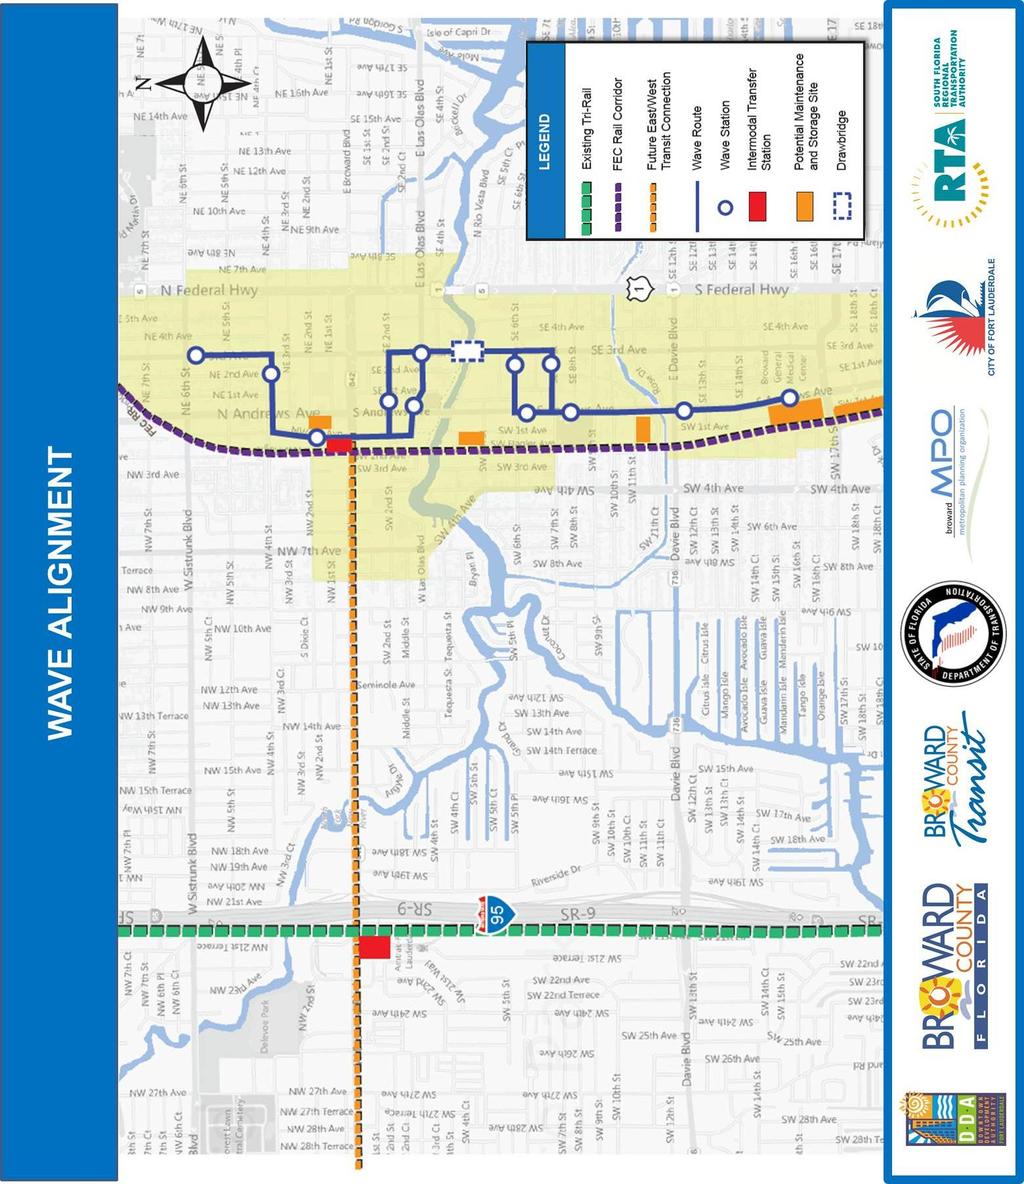 transit improvements in the Oakland Park Blvd. corridor. The A.A. will kick-off in FY 2012 and take up to two years to complete.